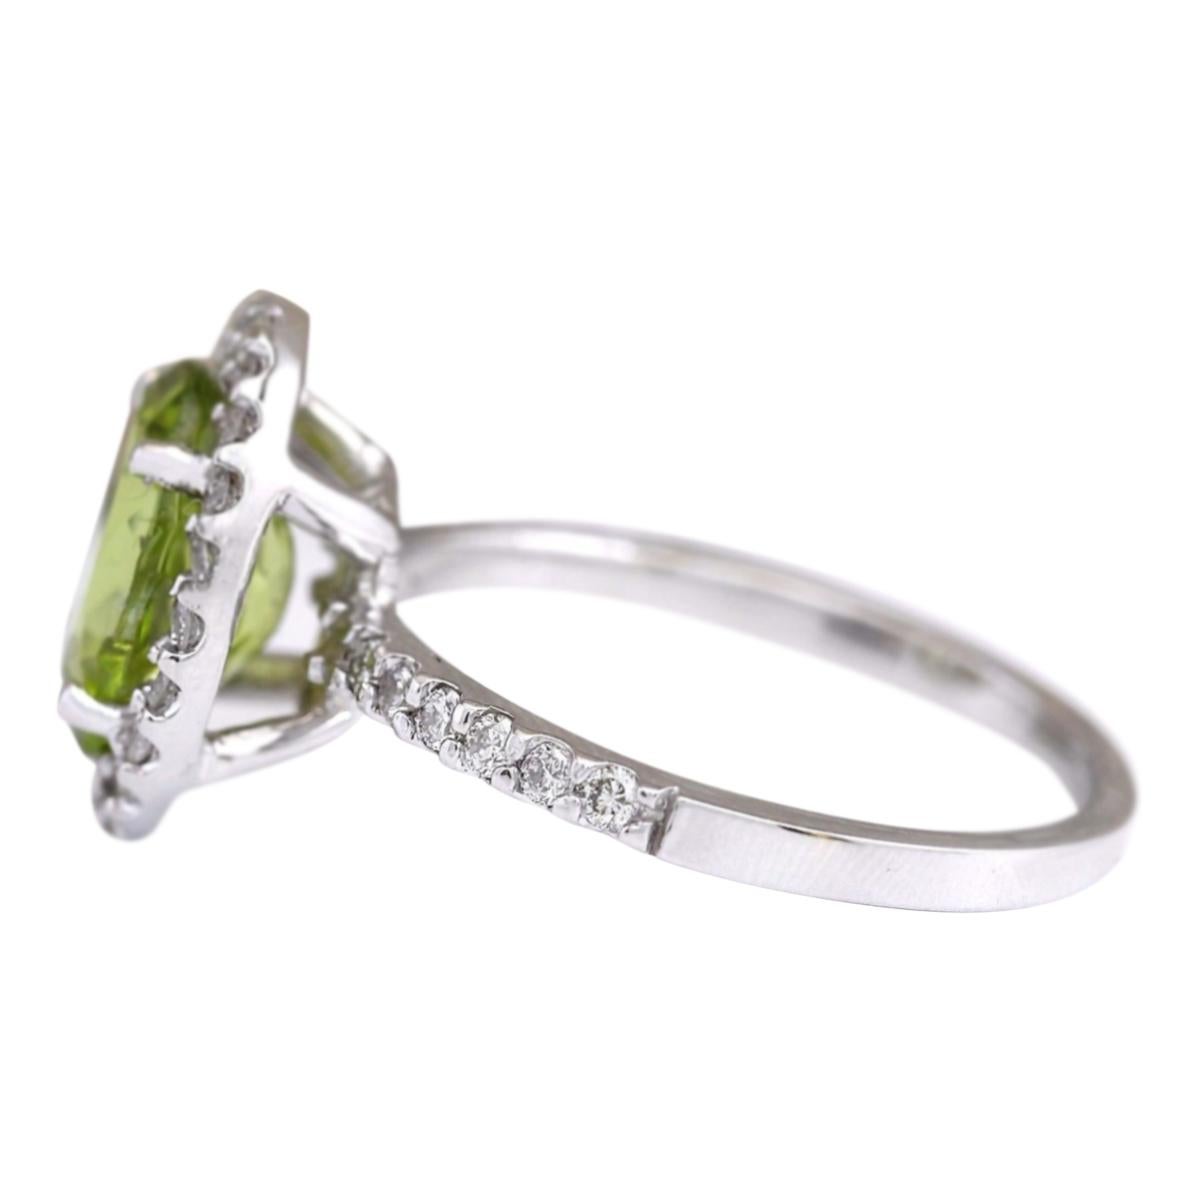 Stamped: 14K White Gold
Total Ring Weight: 3.6 Grams
Total Natural Peridot Weight is 2.62 Carat (Measures: 10.00x8.00 mm)
Color: Green
Total Natural Diamond Weight is 0.40 Carat
Color: F-G, Clarity: VS2-SI1
Face Measures: 13.60x11.45 mm
Sku: